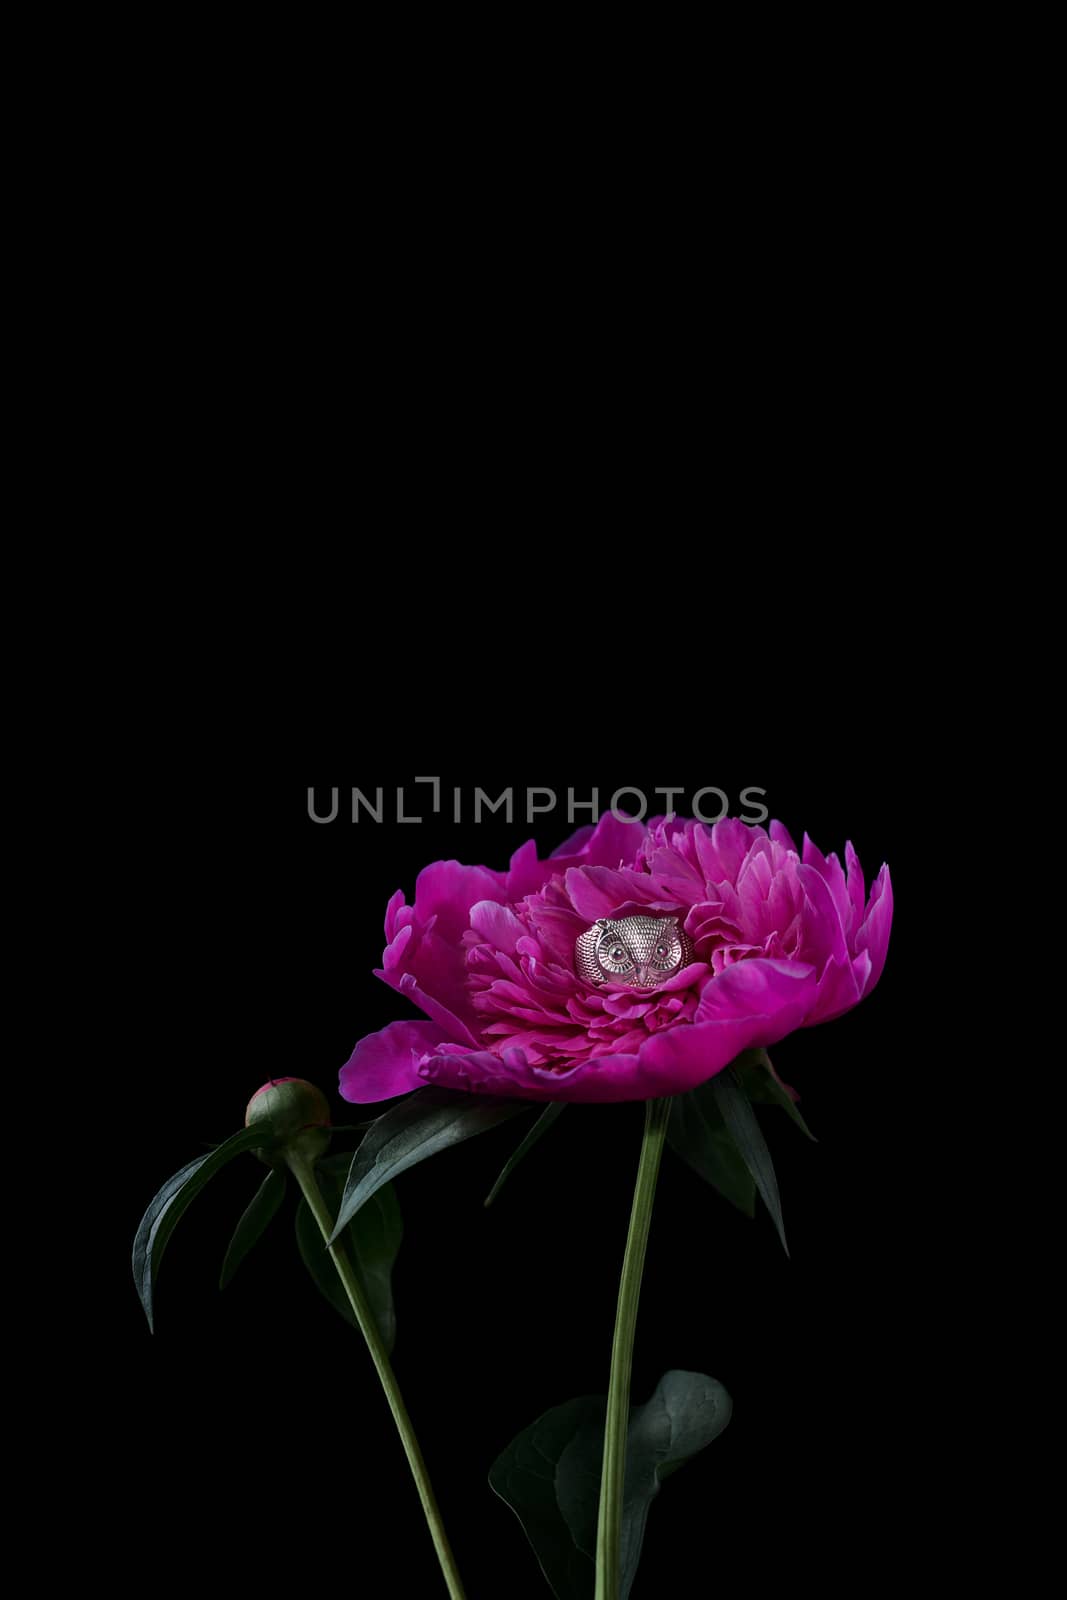 Unique original female silver owl ring in a peony flower isolated on black background. Stock phooto of luxury accessories.